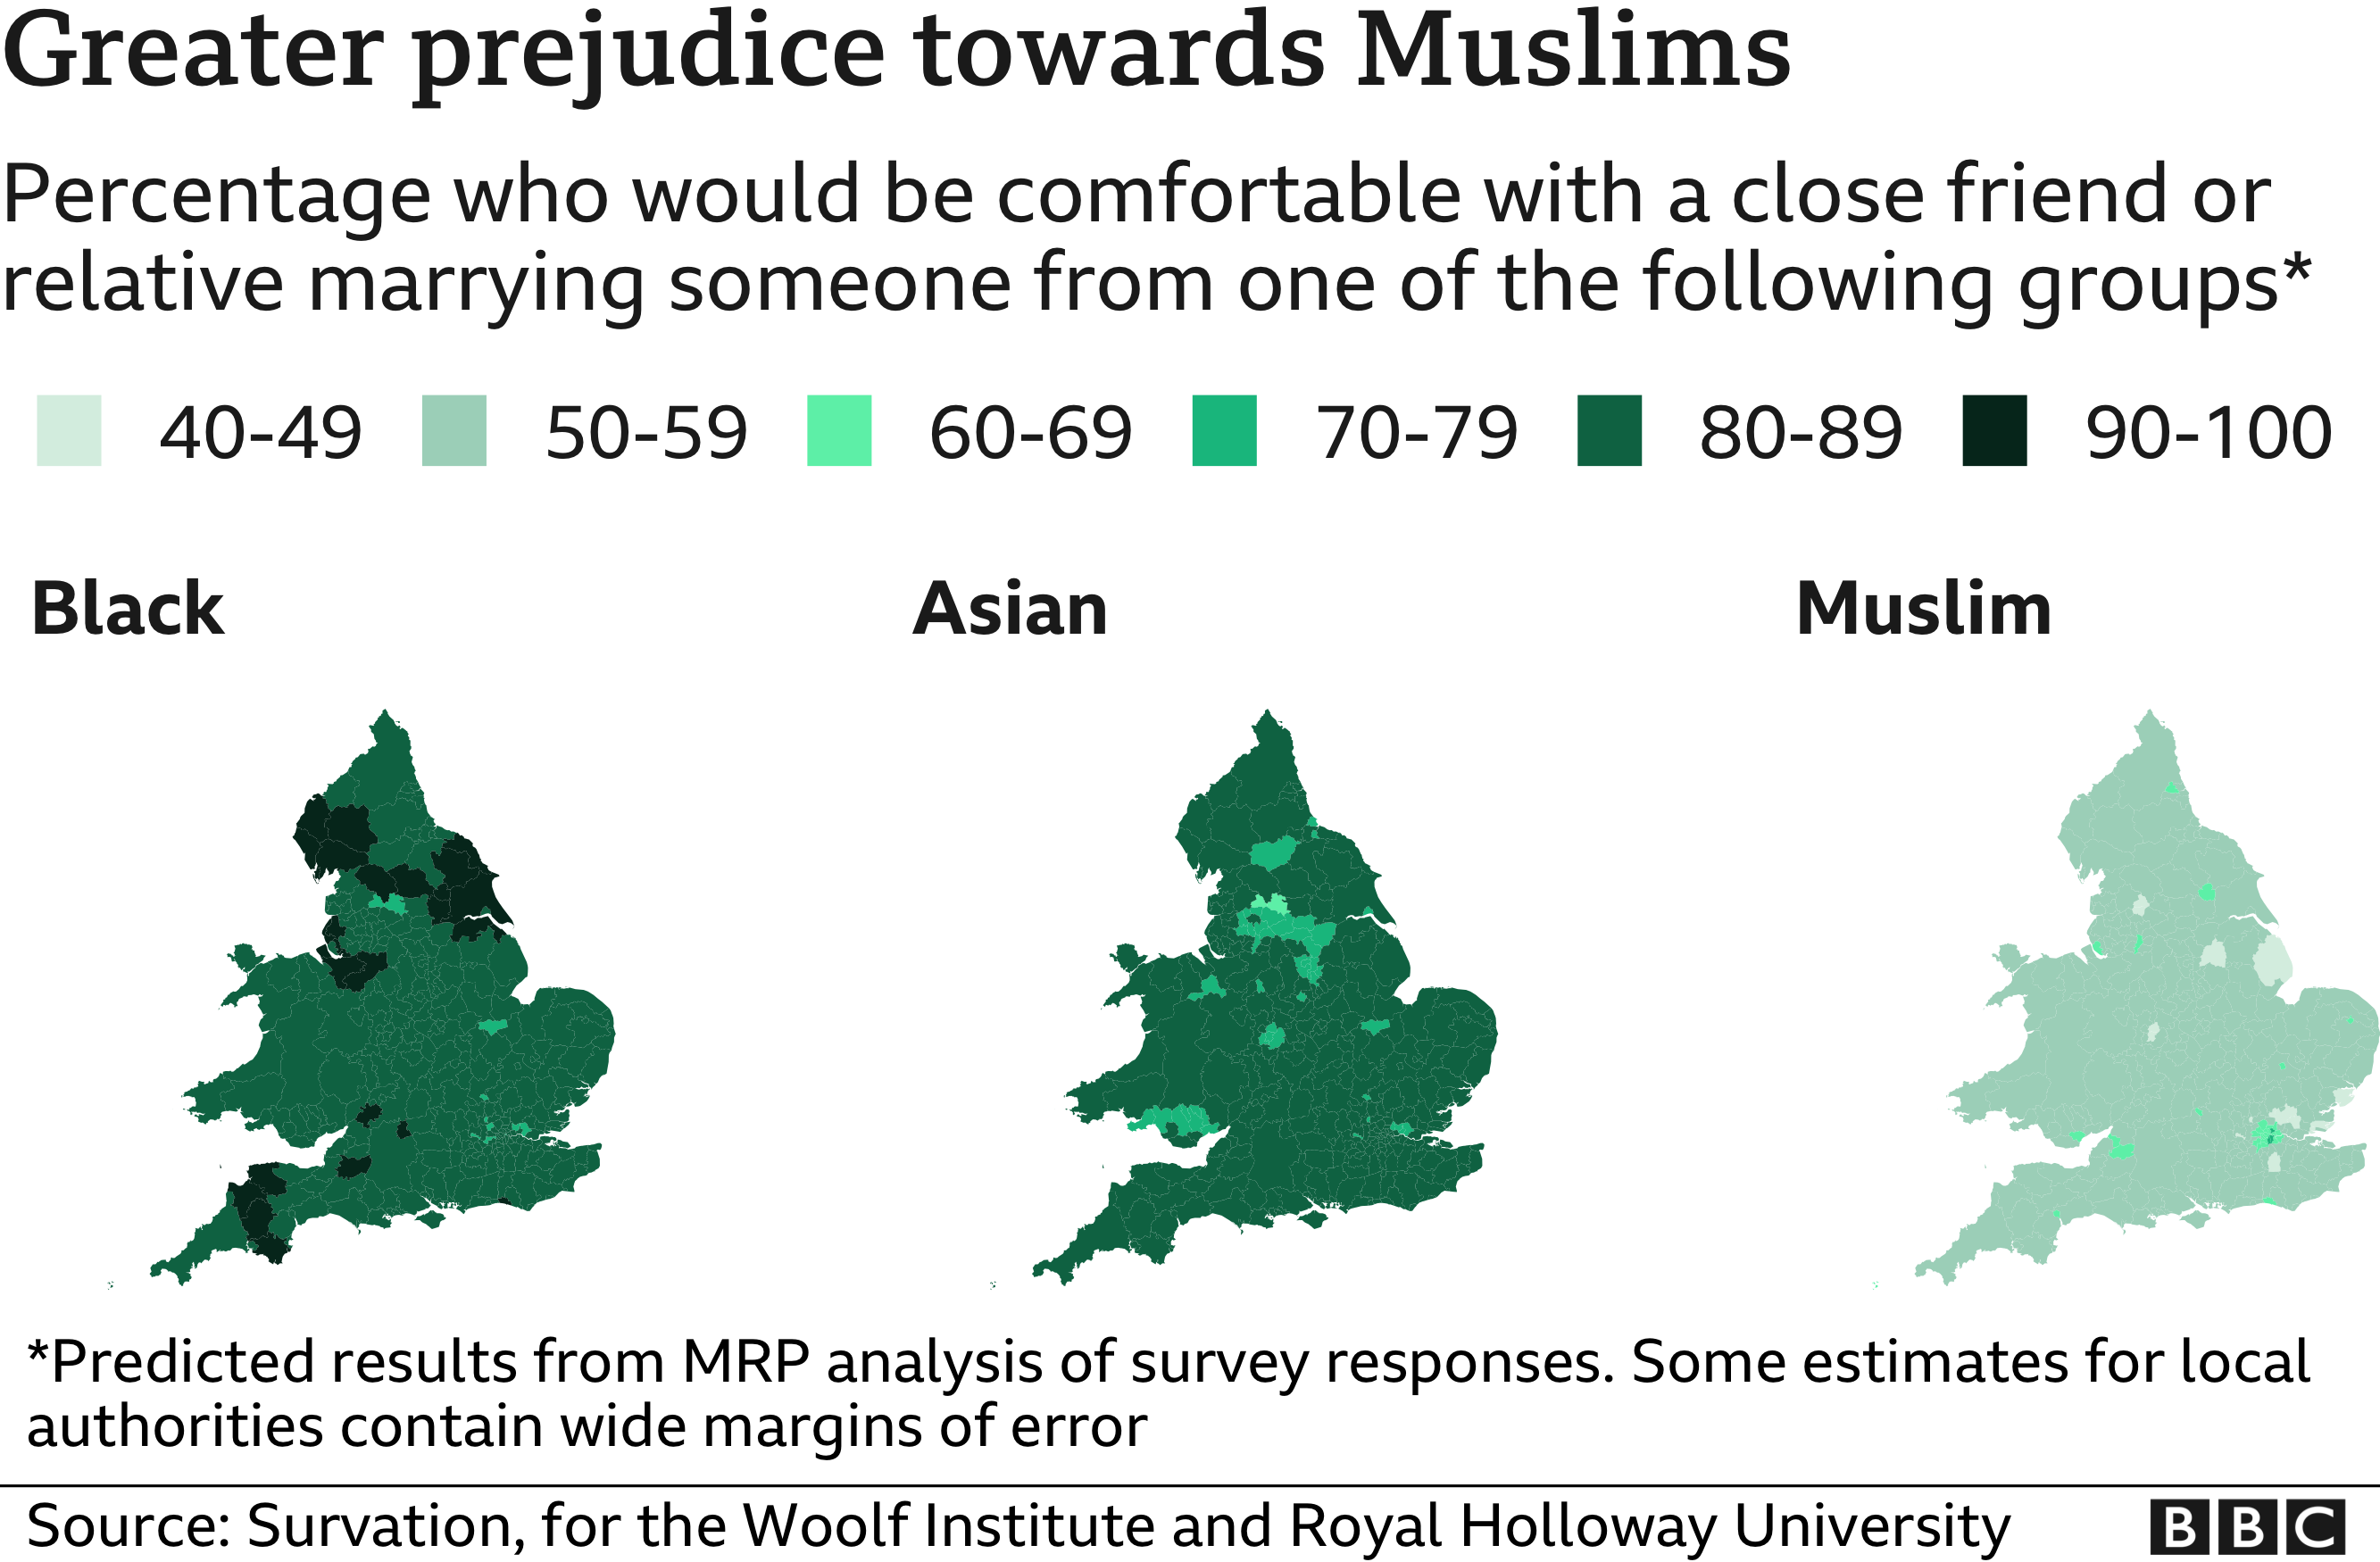 Graphic showing the percentage of people who would be comfortable with a close friend or relative marrying someone who is black, Asian or Muslim